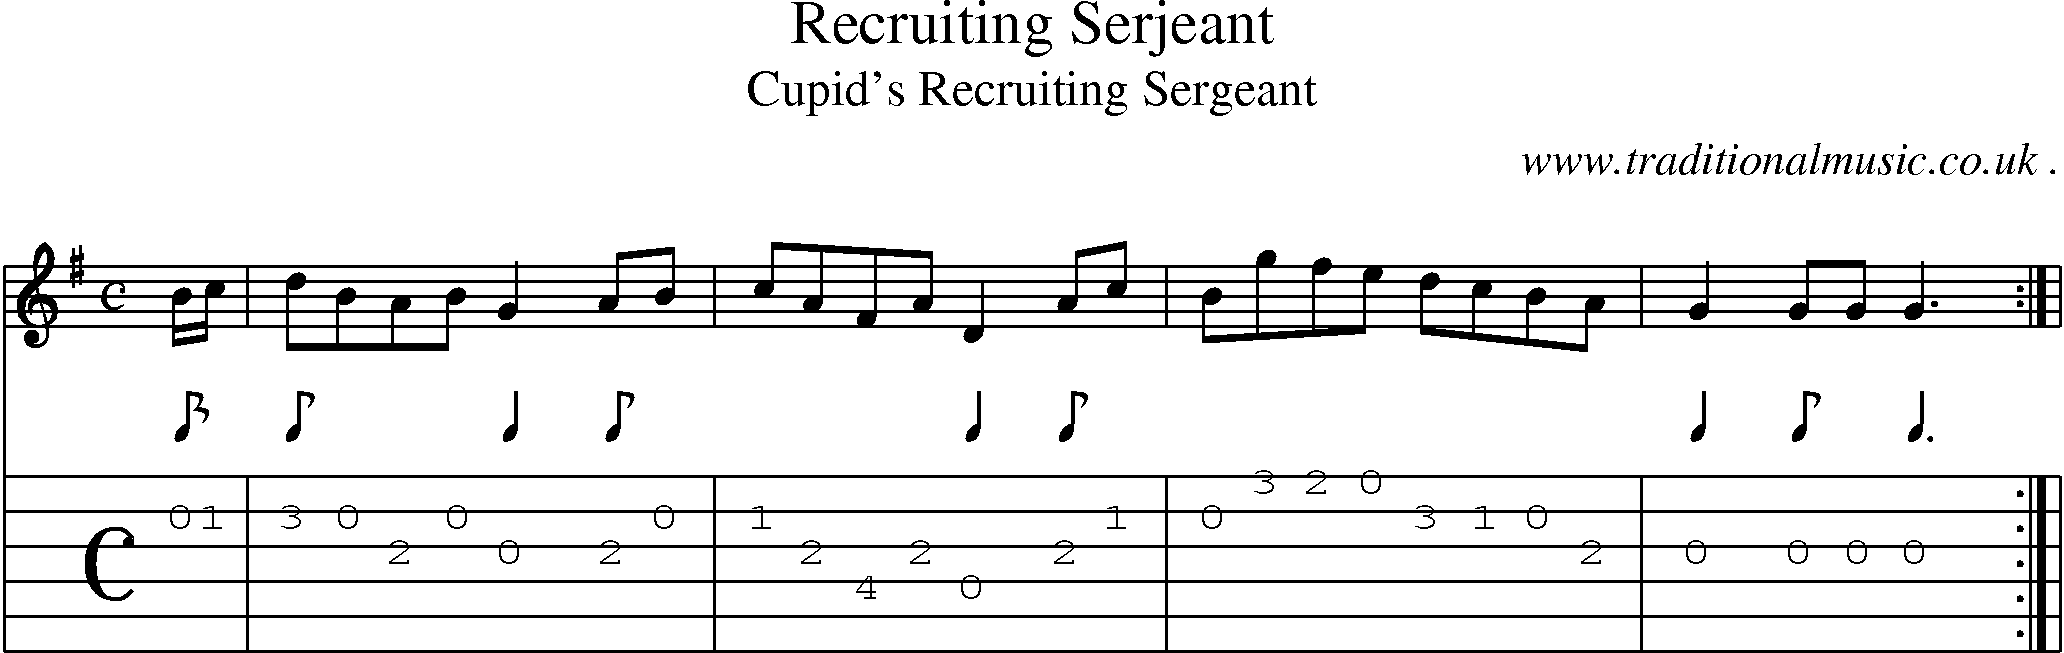 Sheet-Music and Guitar Tabs for Recruiting Serjeant